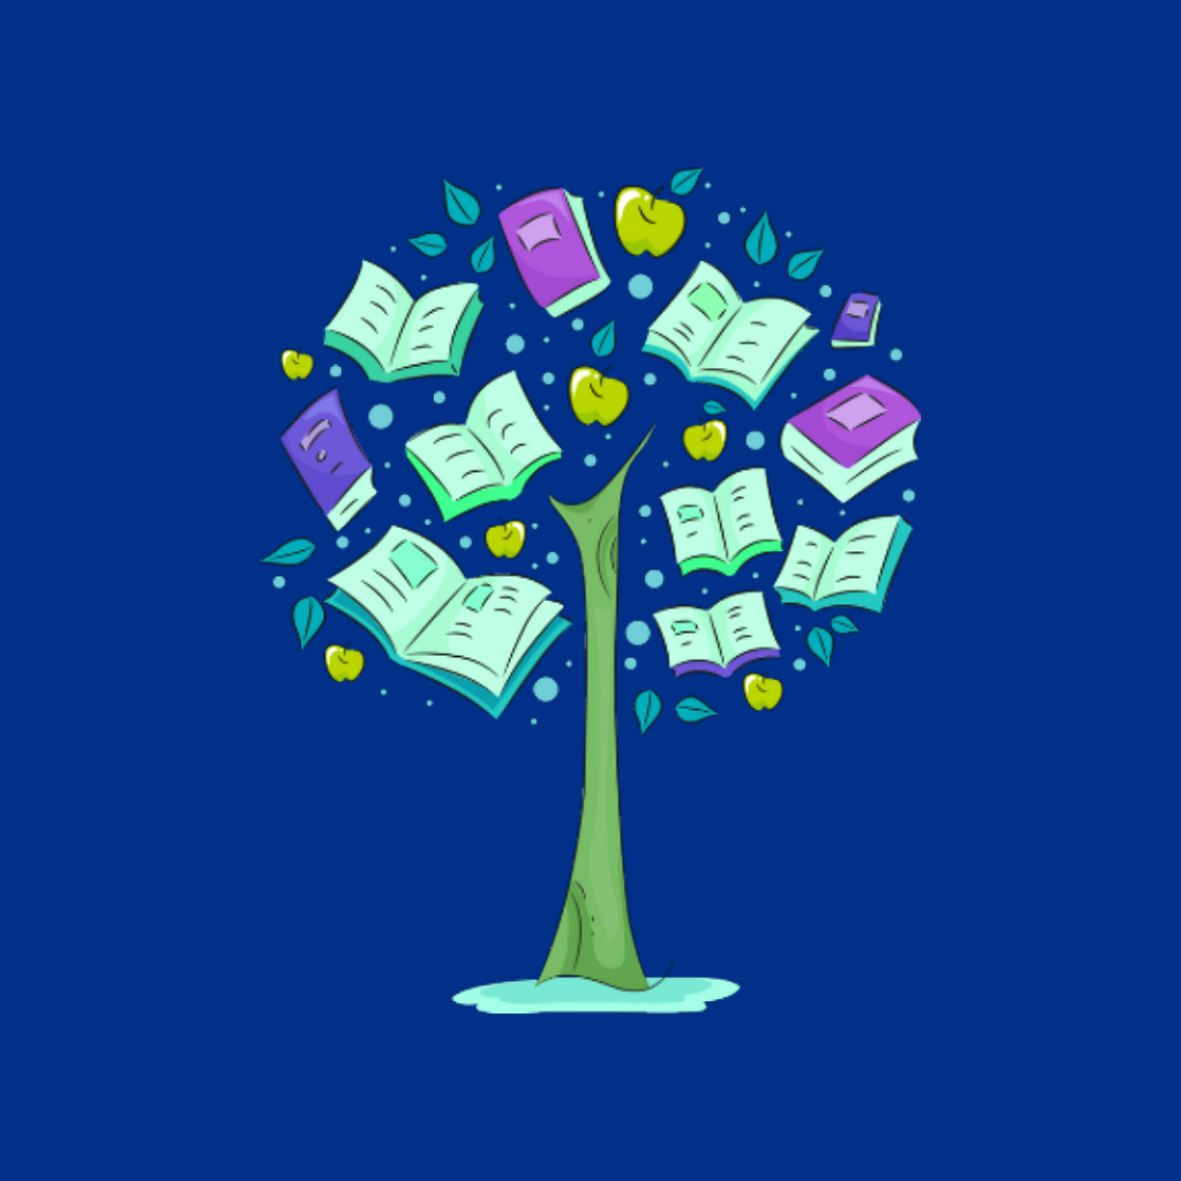 Image of Tree and Books to Represent Learning Disabilities